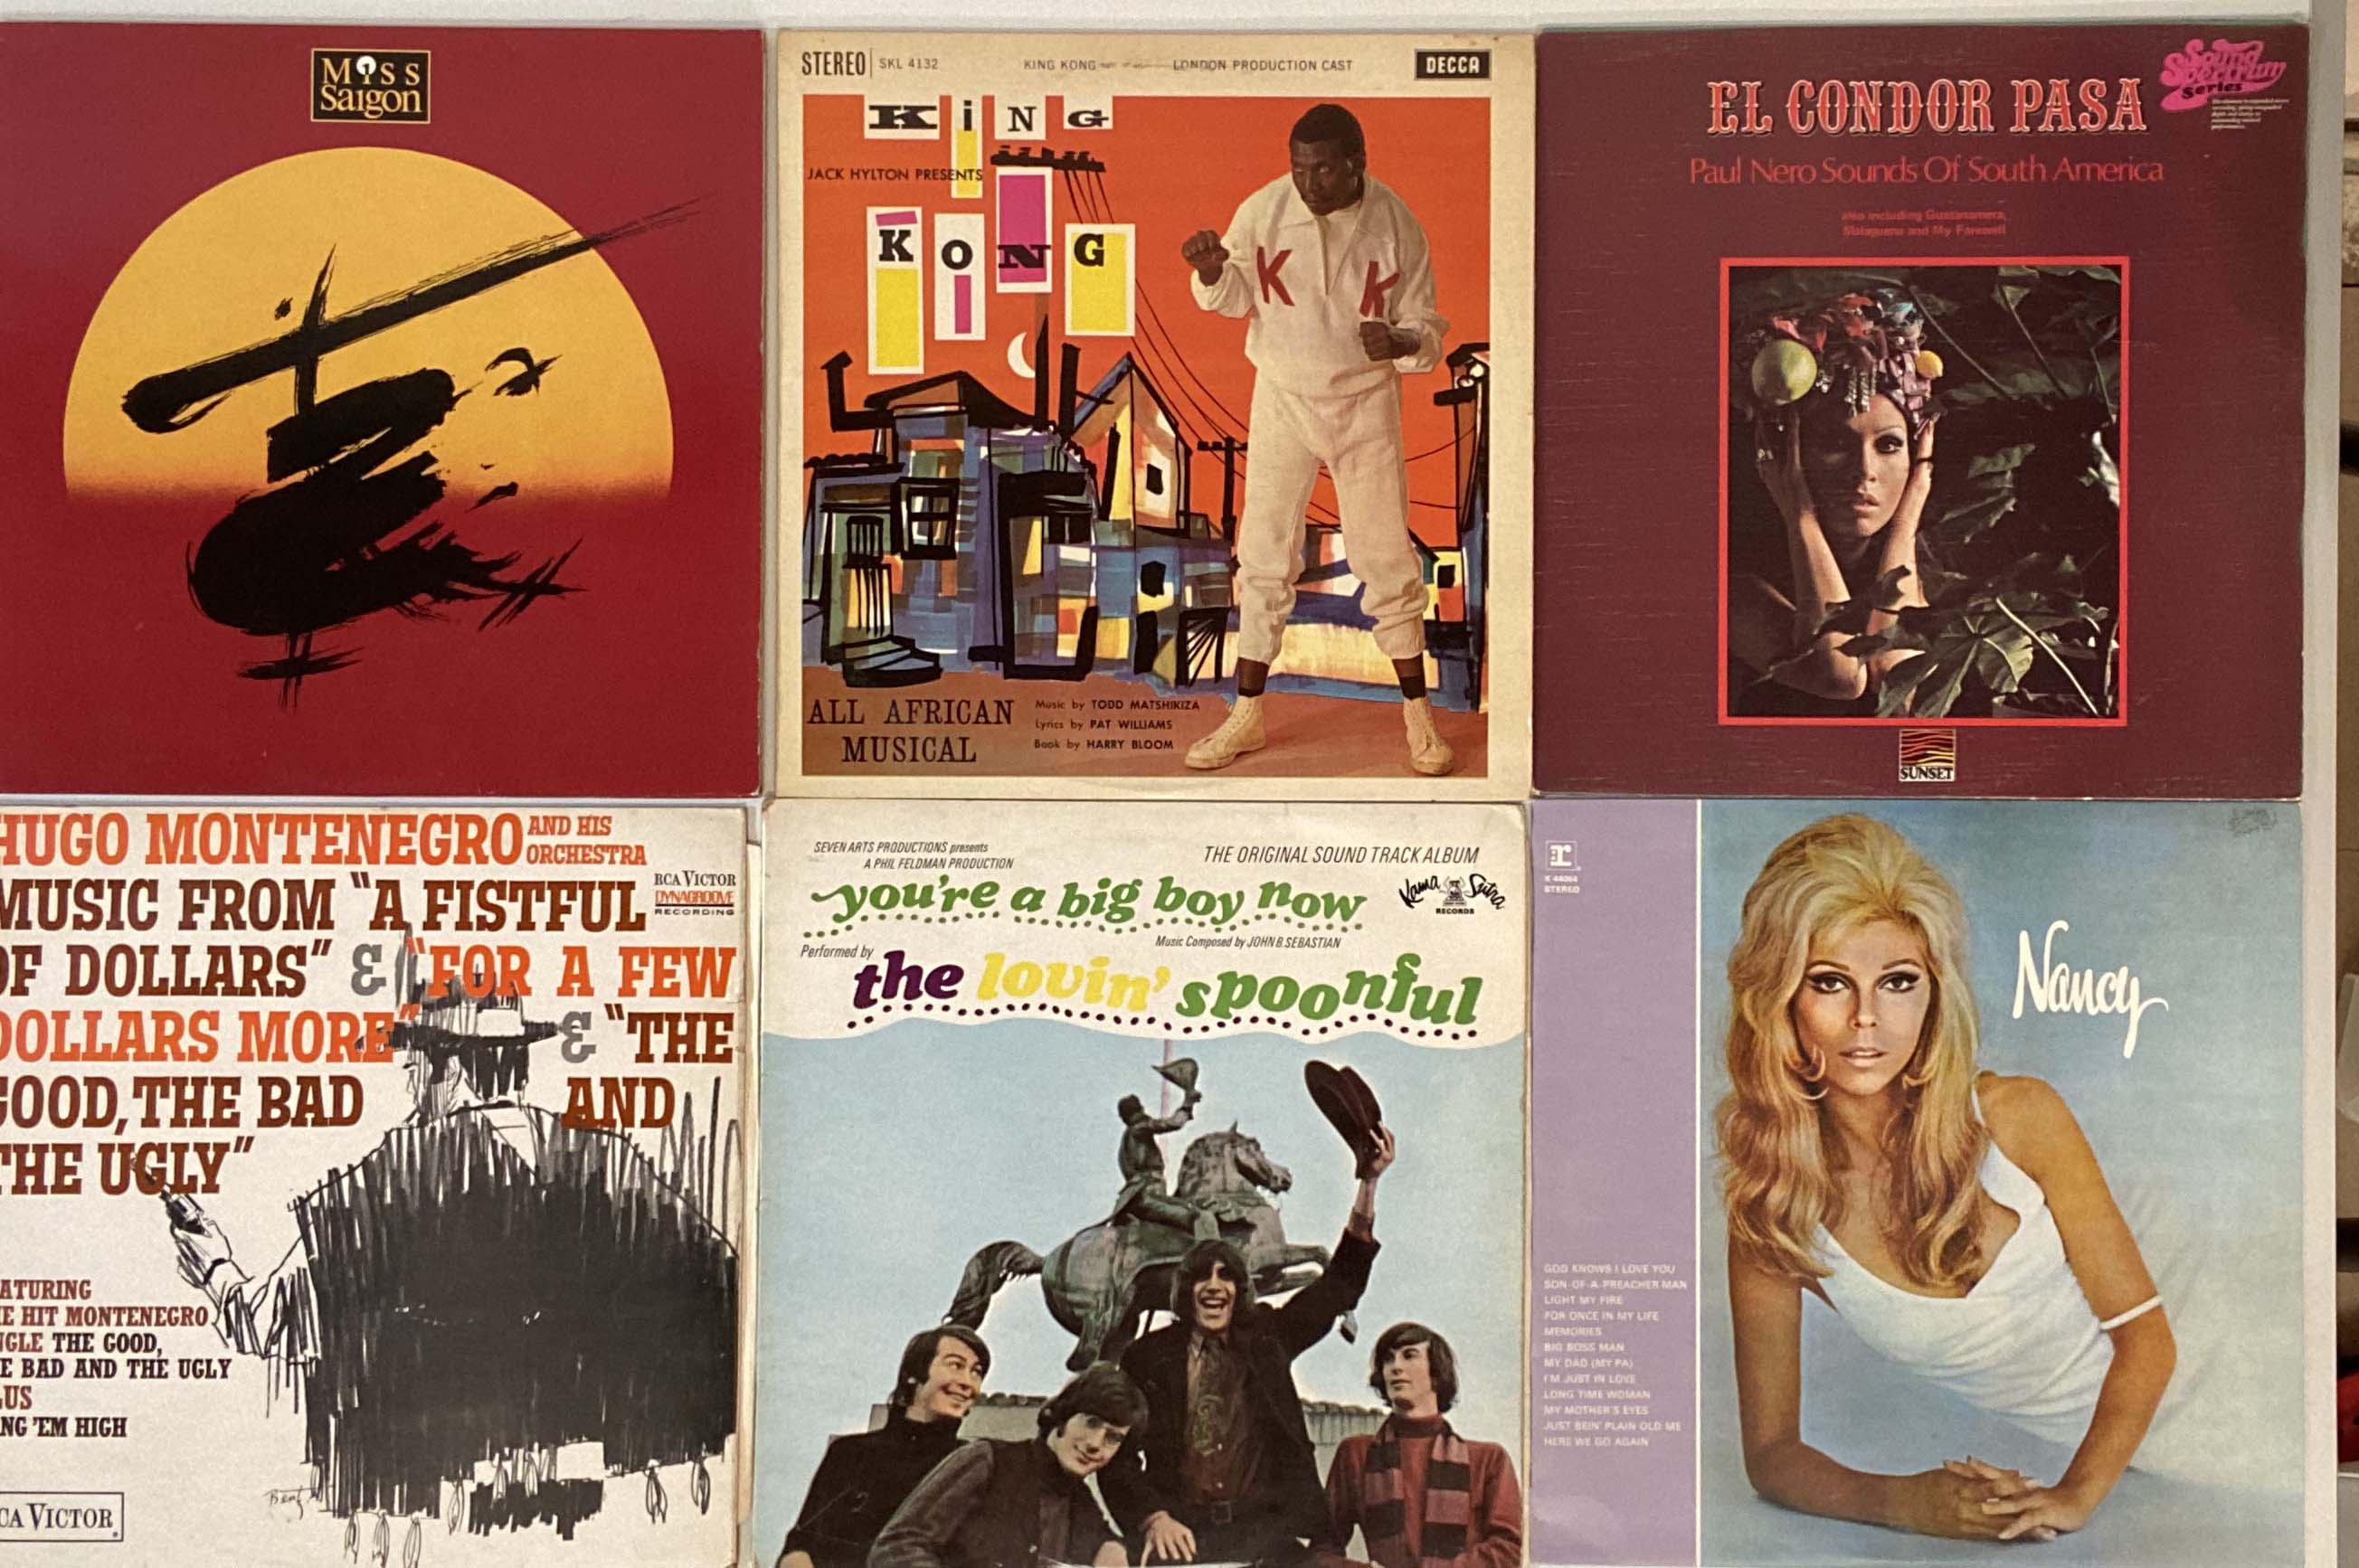 TORCH/SOUNDTRACK/RAT PACK/EXOTICA/COMEDY/COUNTRY/EASY - LPs. - Image 3 of 6